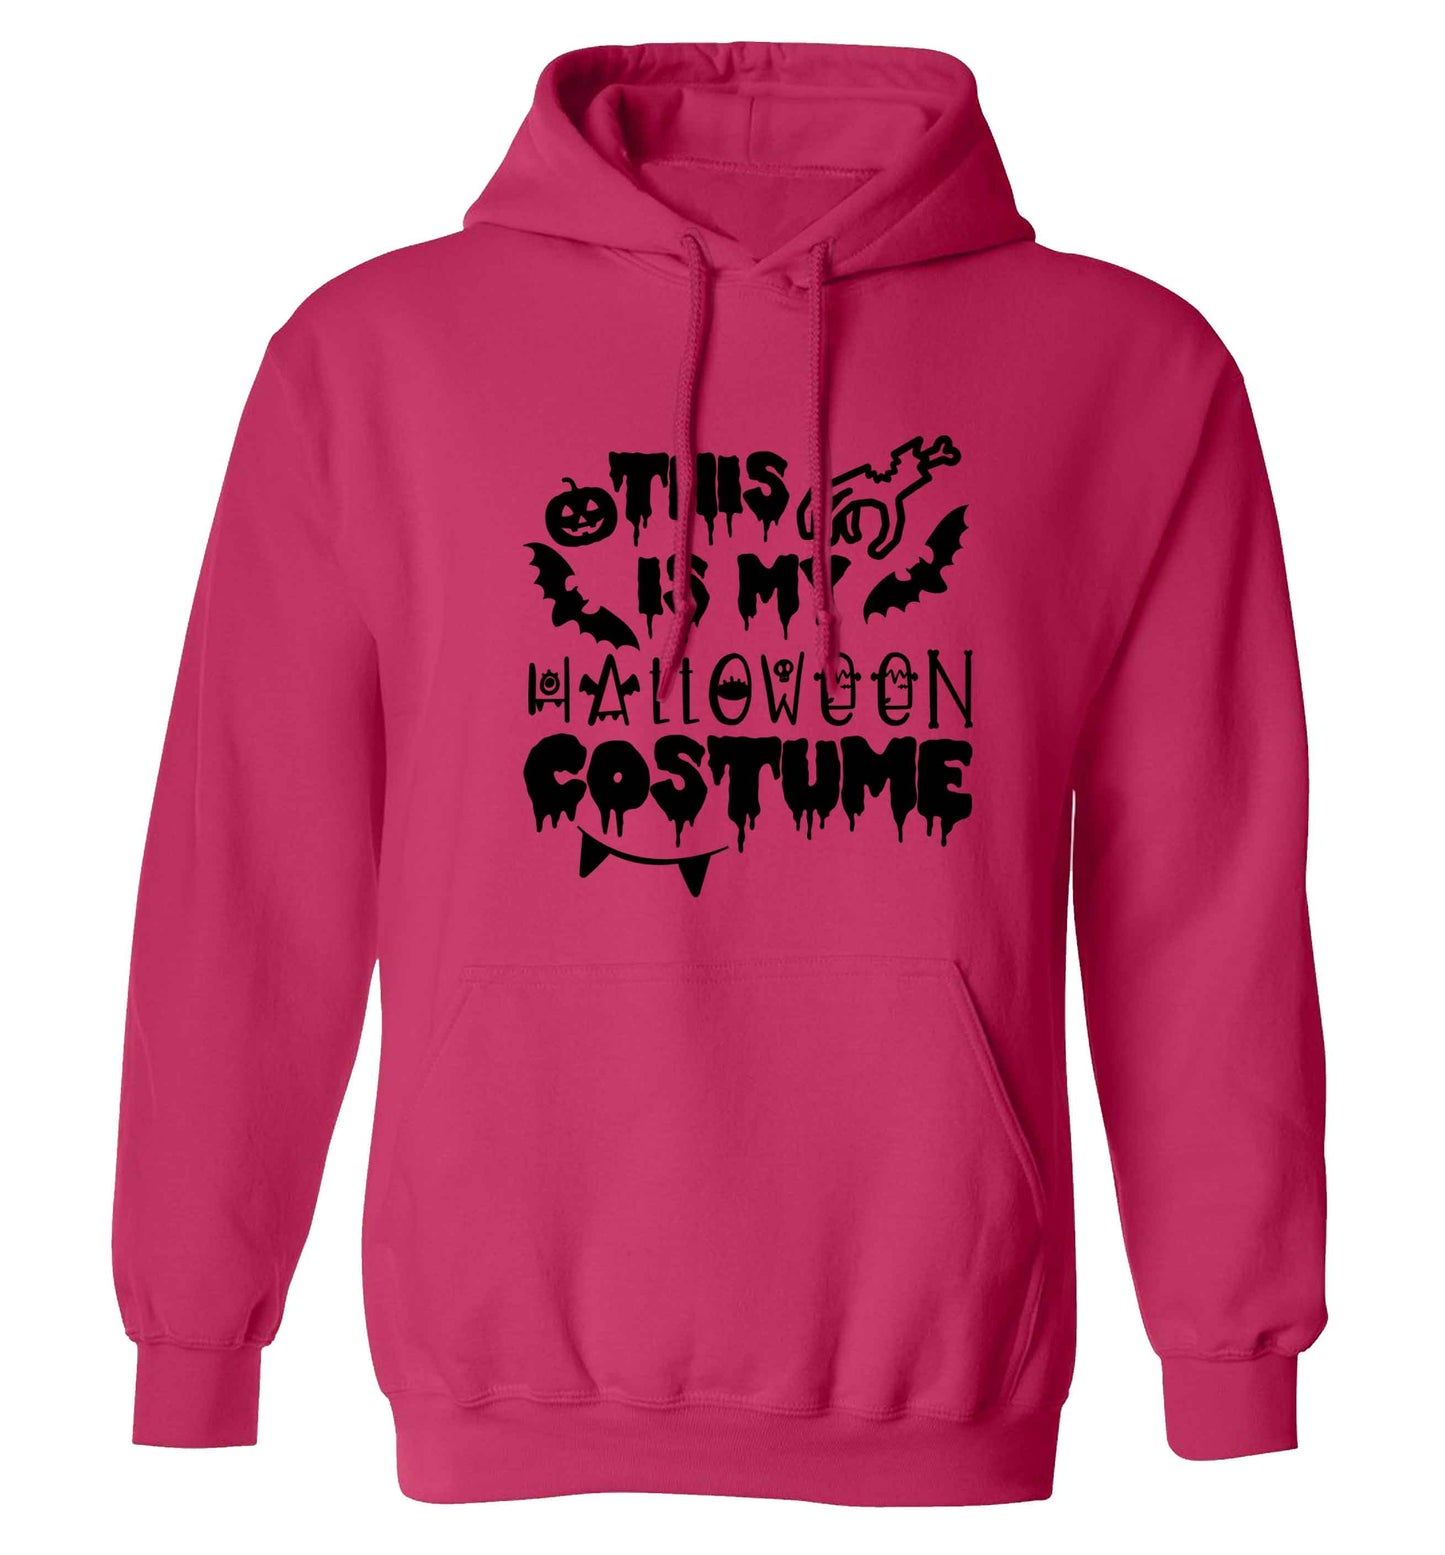 This is my halloween costume adults unisex pink hoodie 2XL